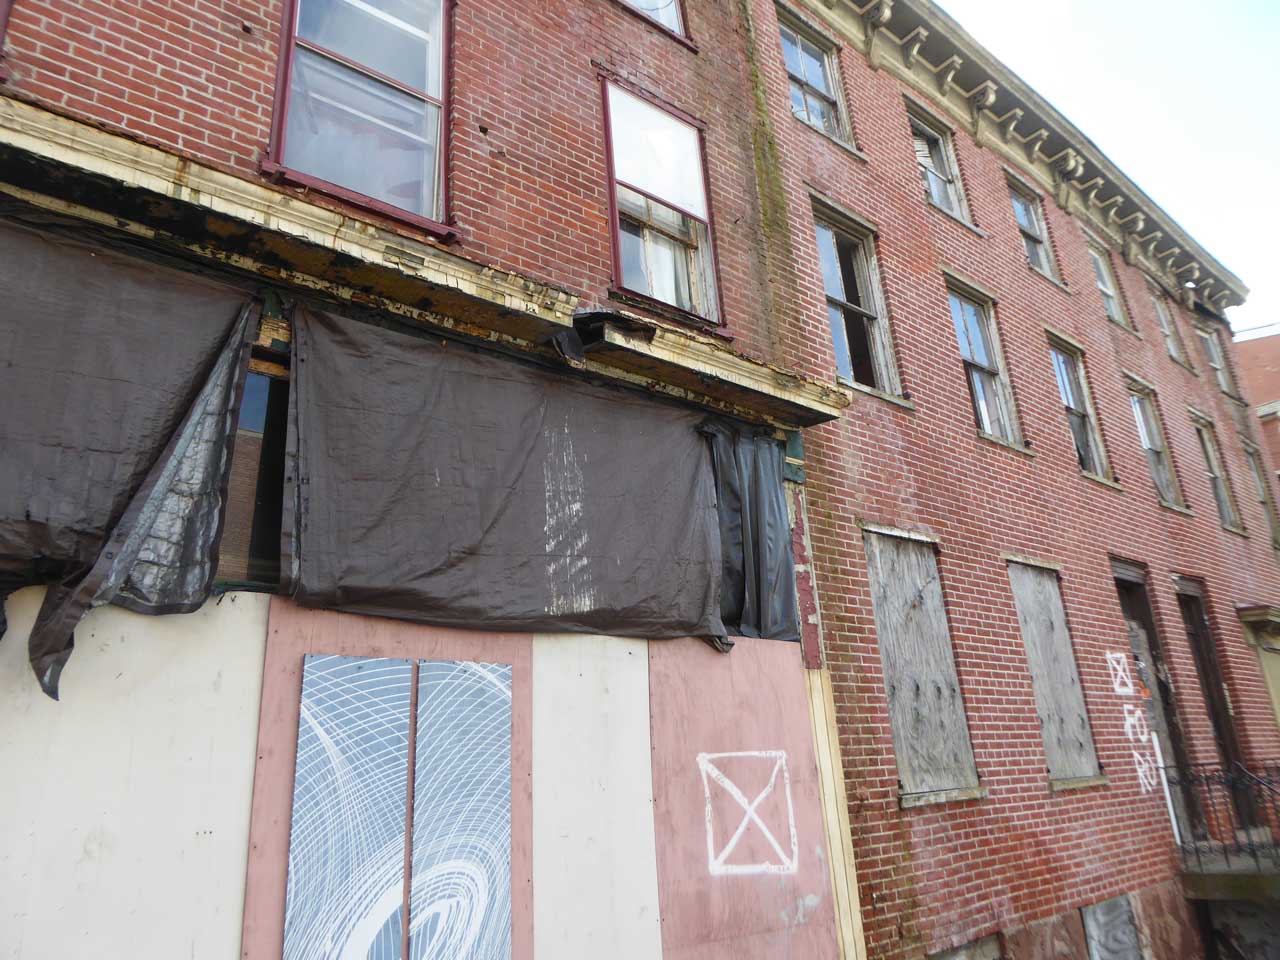 Abandoned Buildings Like These In Trenton Are Where Some Homeless Residents Can Be Found Overnight